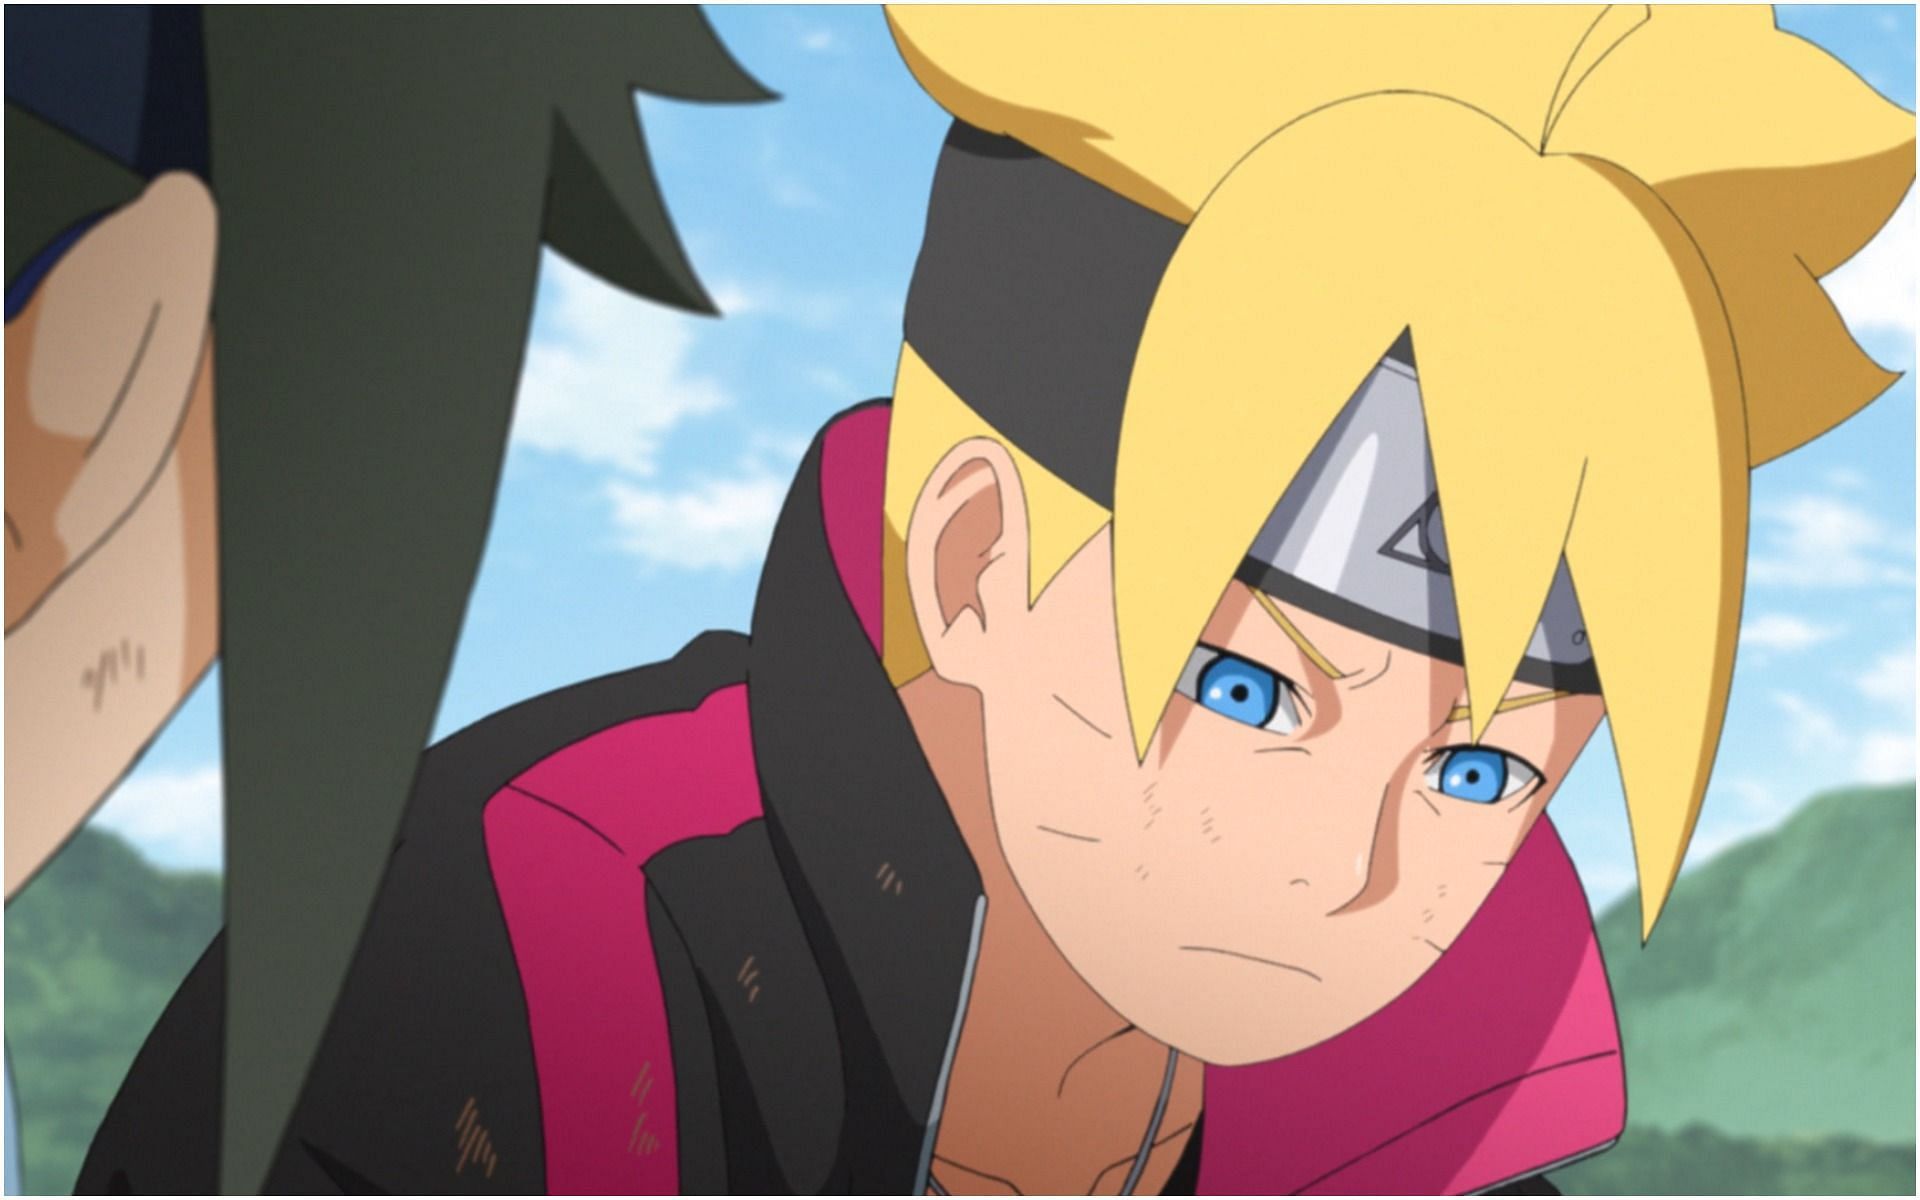 Why the Boruto Anime Is So Bad (But the Manga Is So Great)